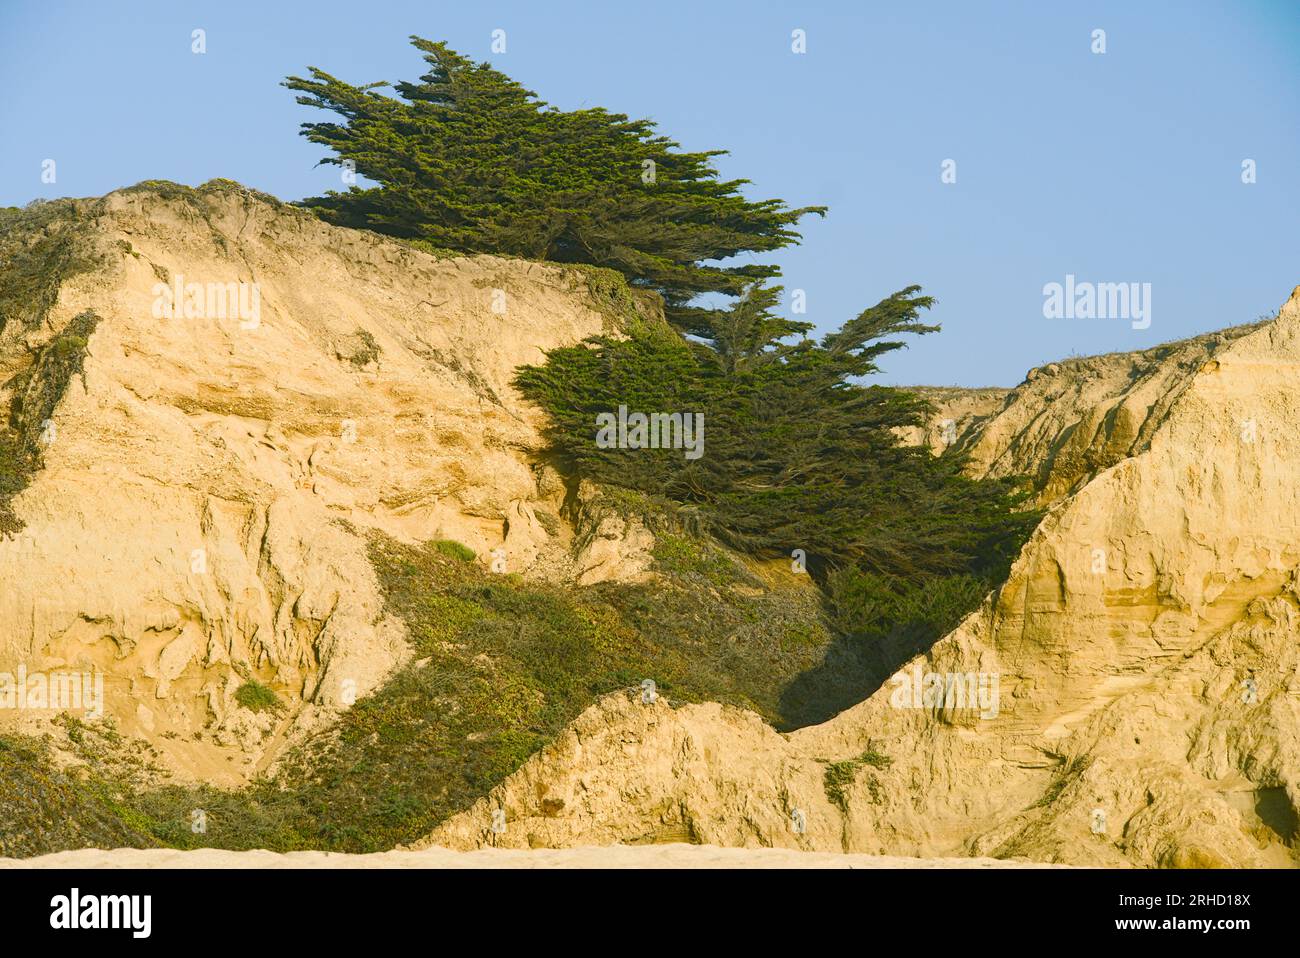 Cypress trees on the costal cliffs along costal trail in Half Moon Bay. Stock Photo